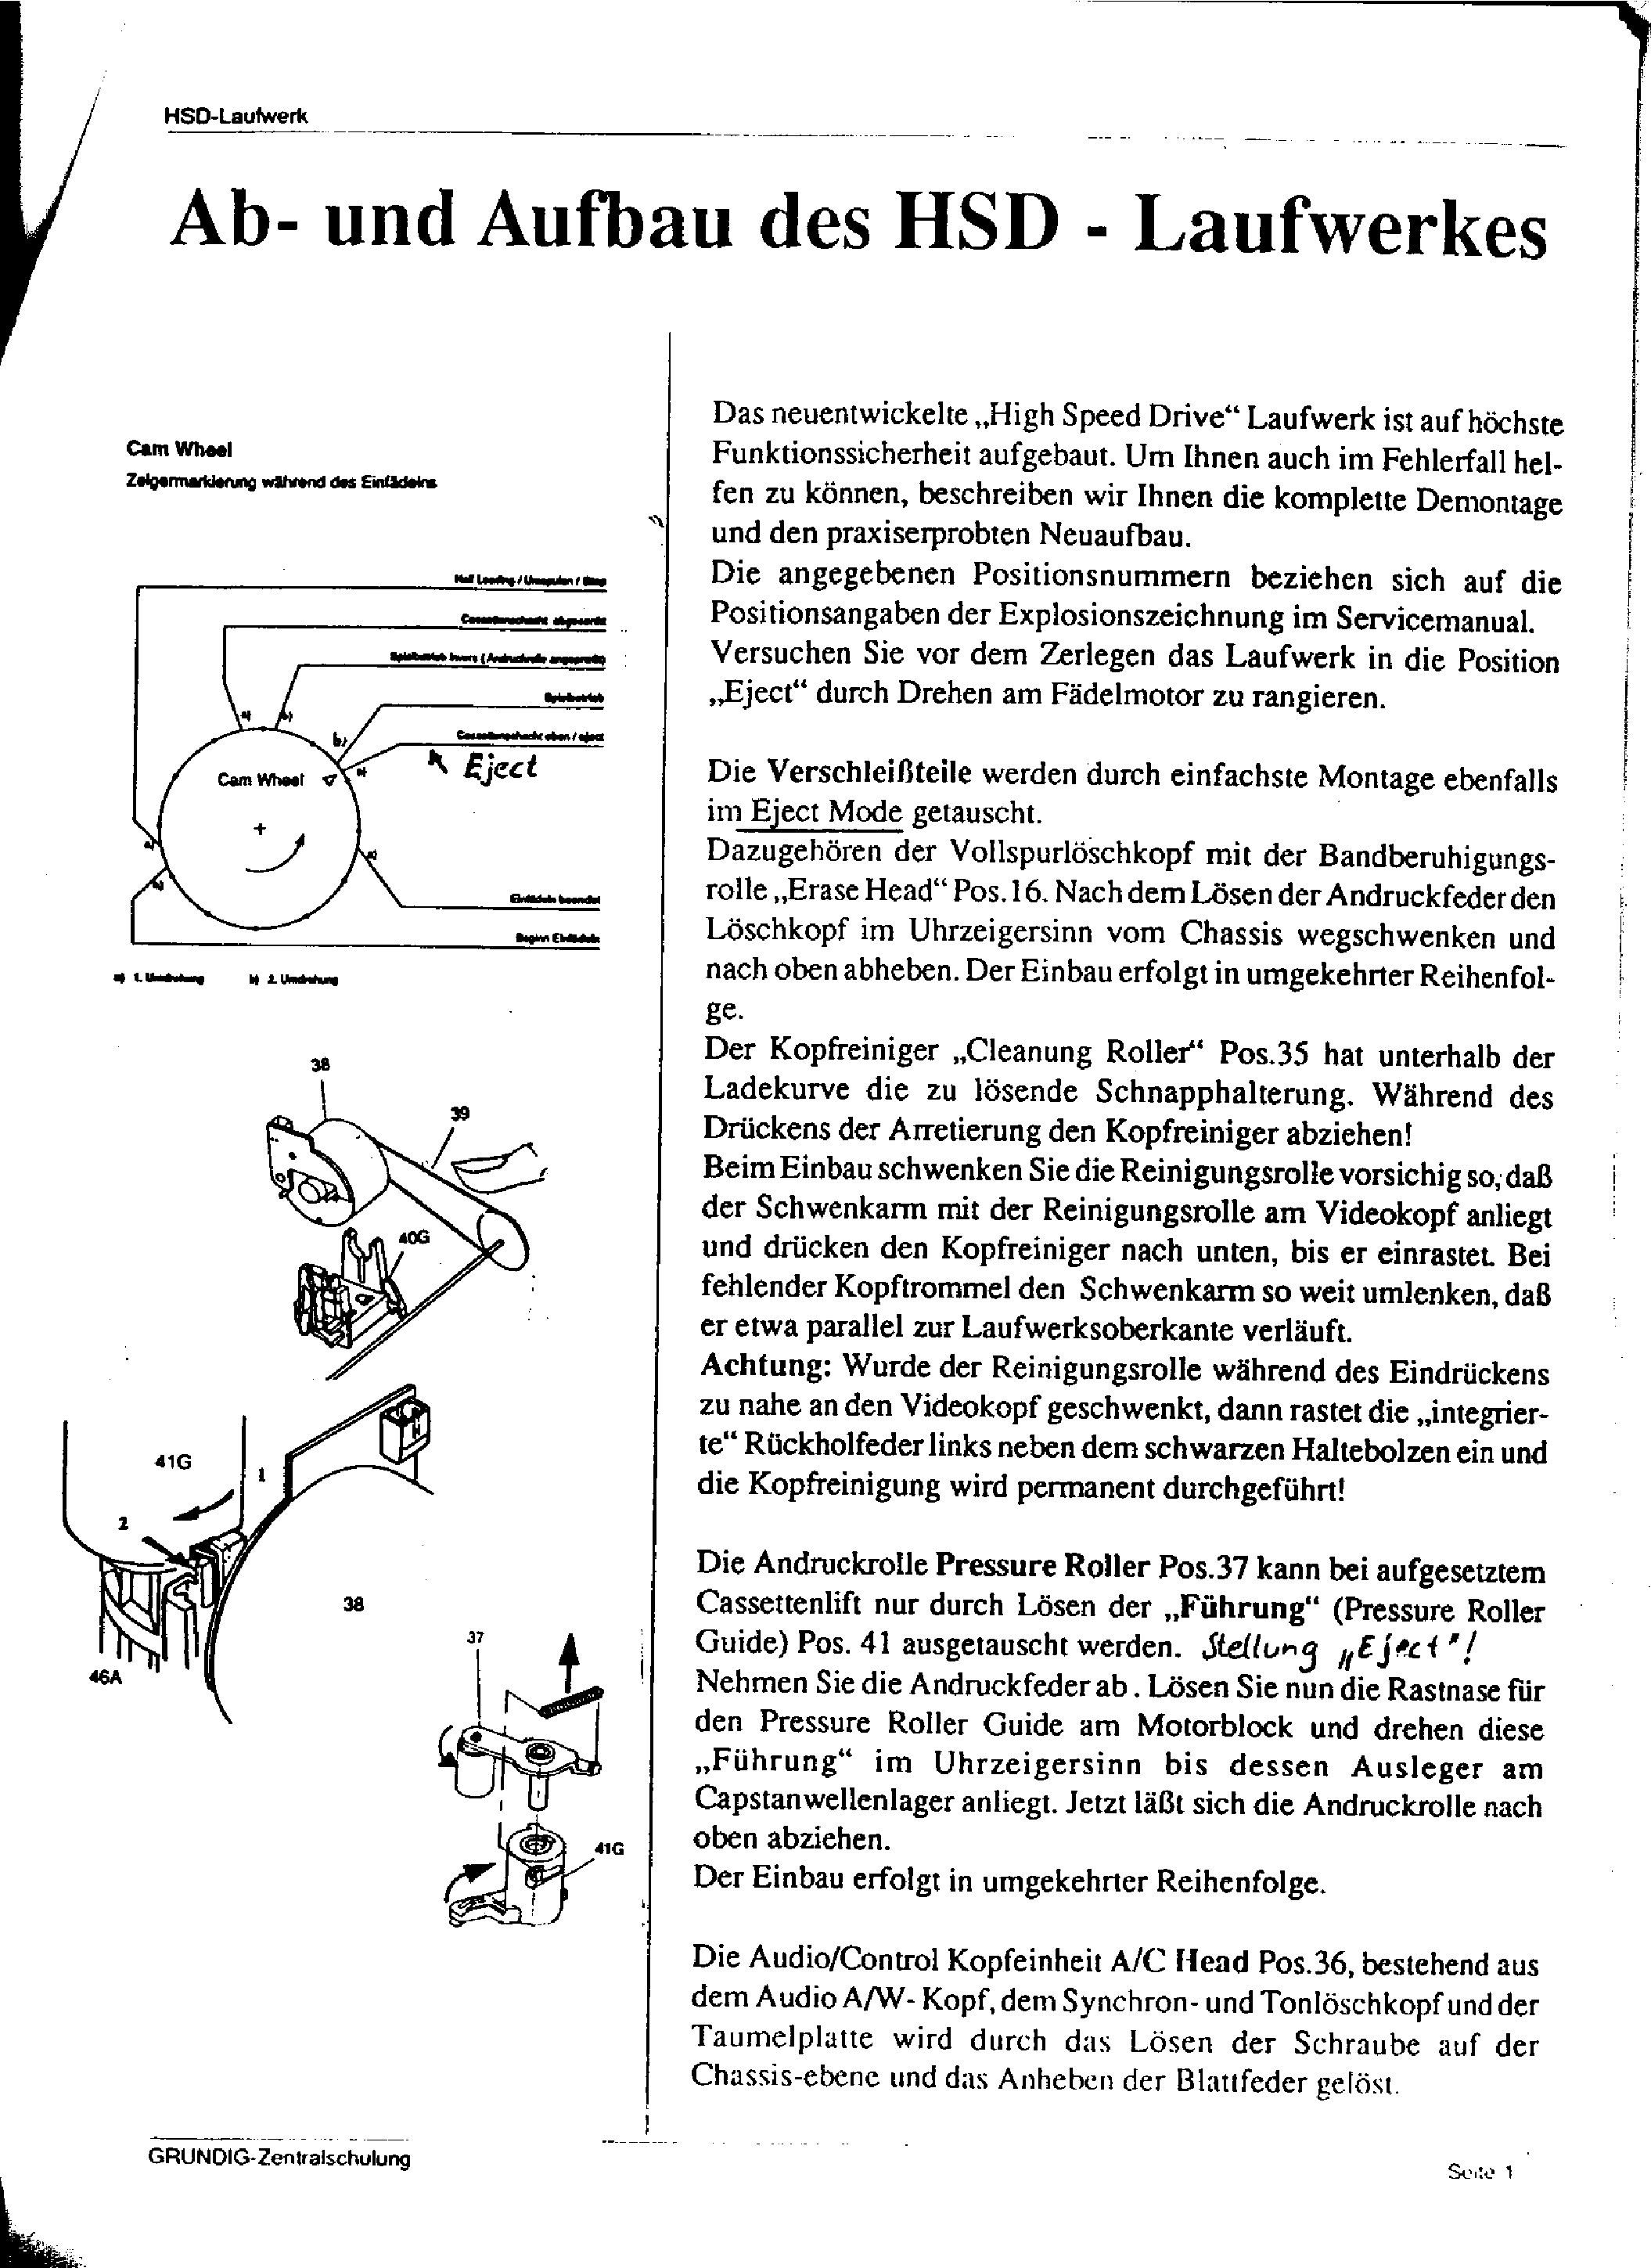 PHILIPS TURBODECK TV-VCR SM service manual (1st page)